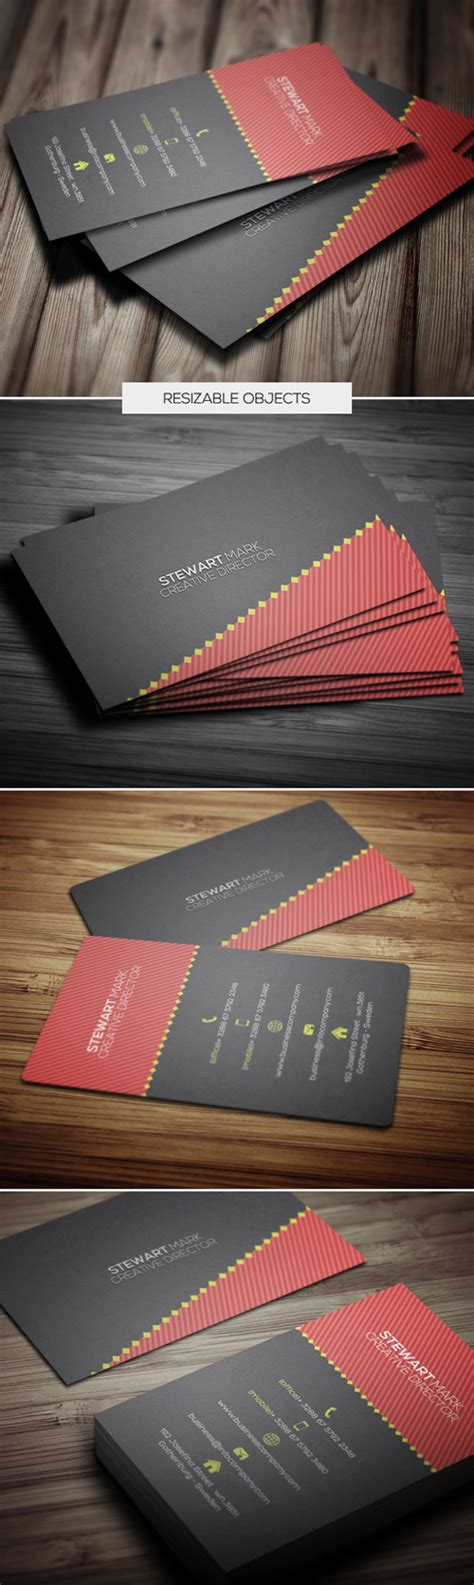 29 High Quality Creative And Unique Business Cards Design Graphic